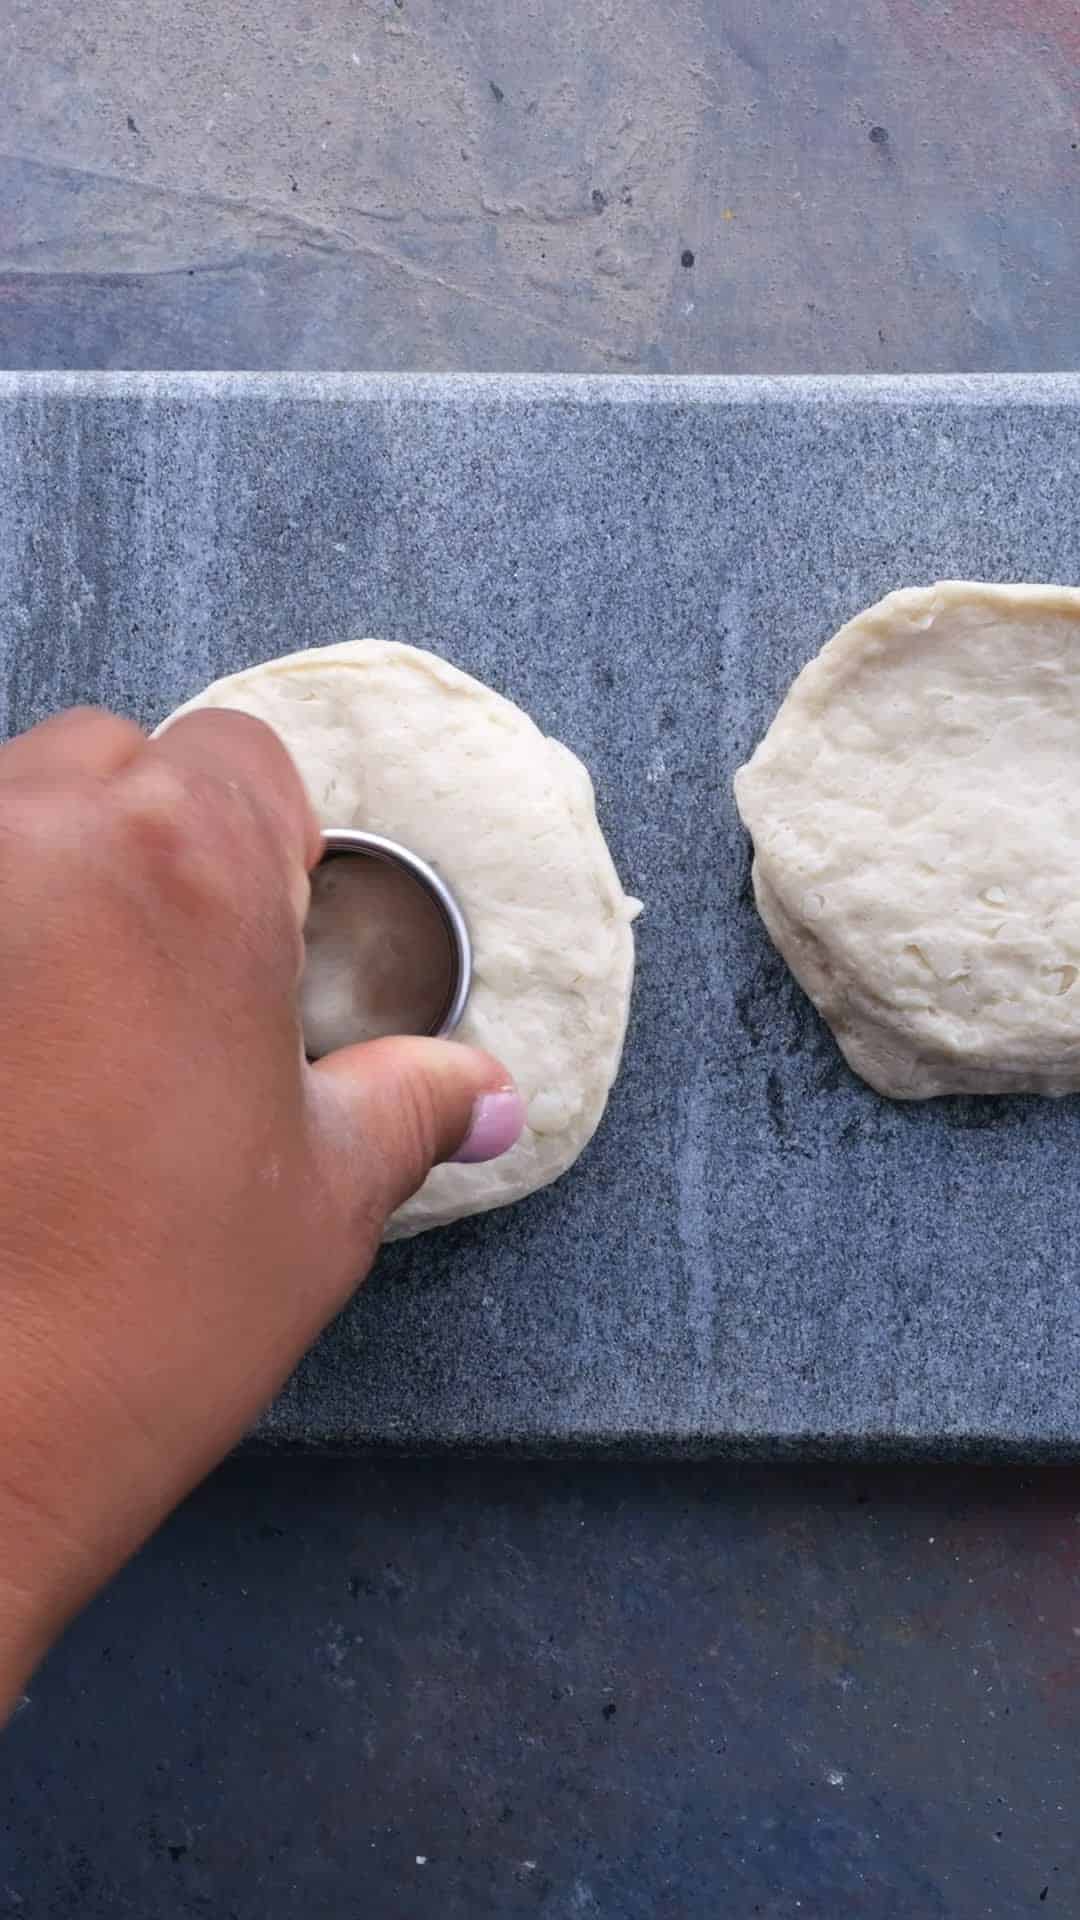 Canned biscuits having their centers removed on a slate surface